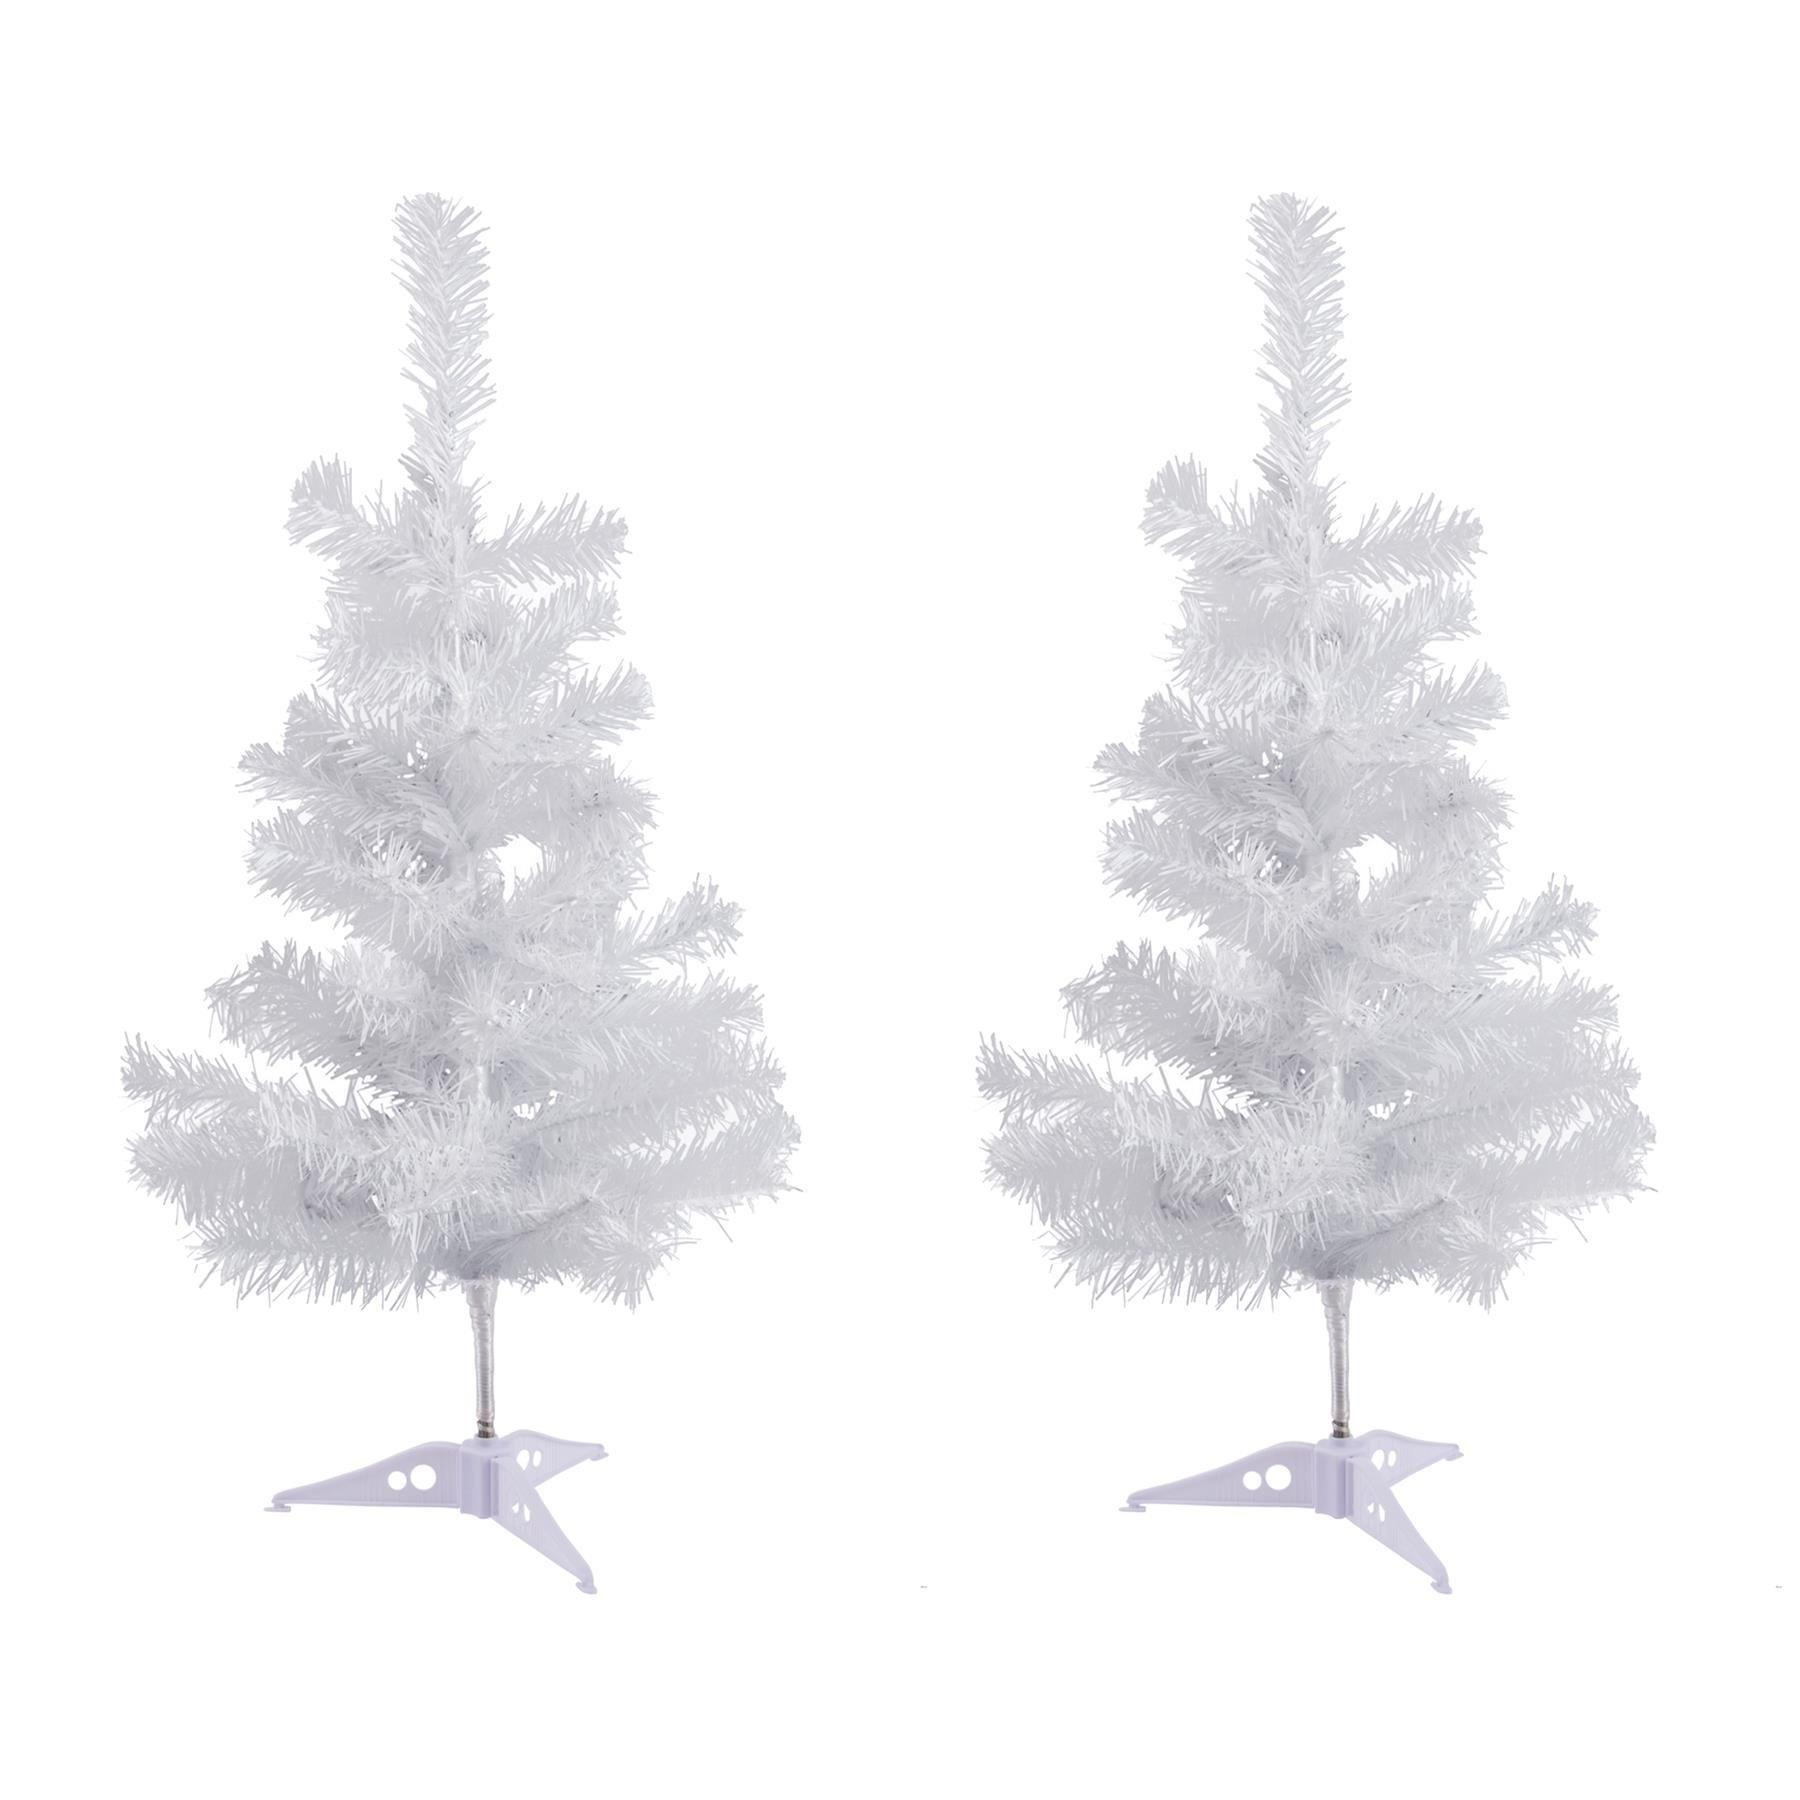 Artificial Fir Christmas Trees 60cm Pack of 2 - image 1